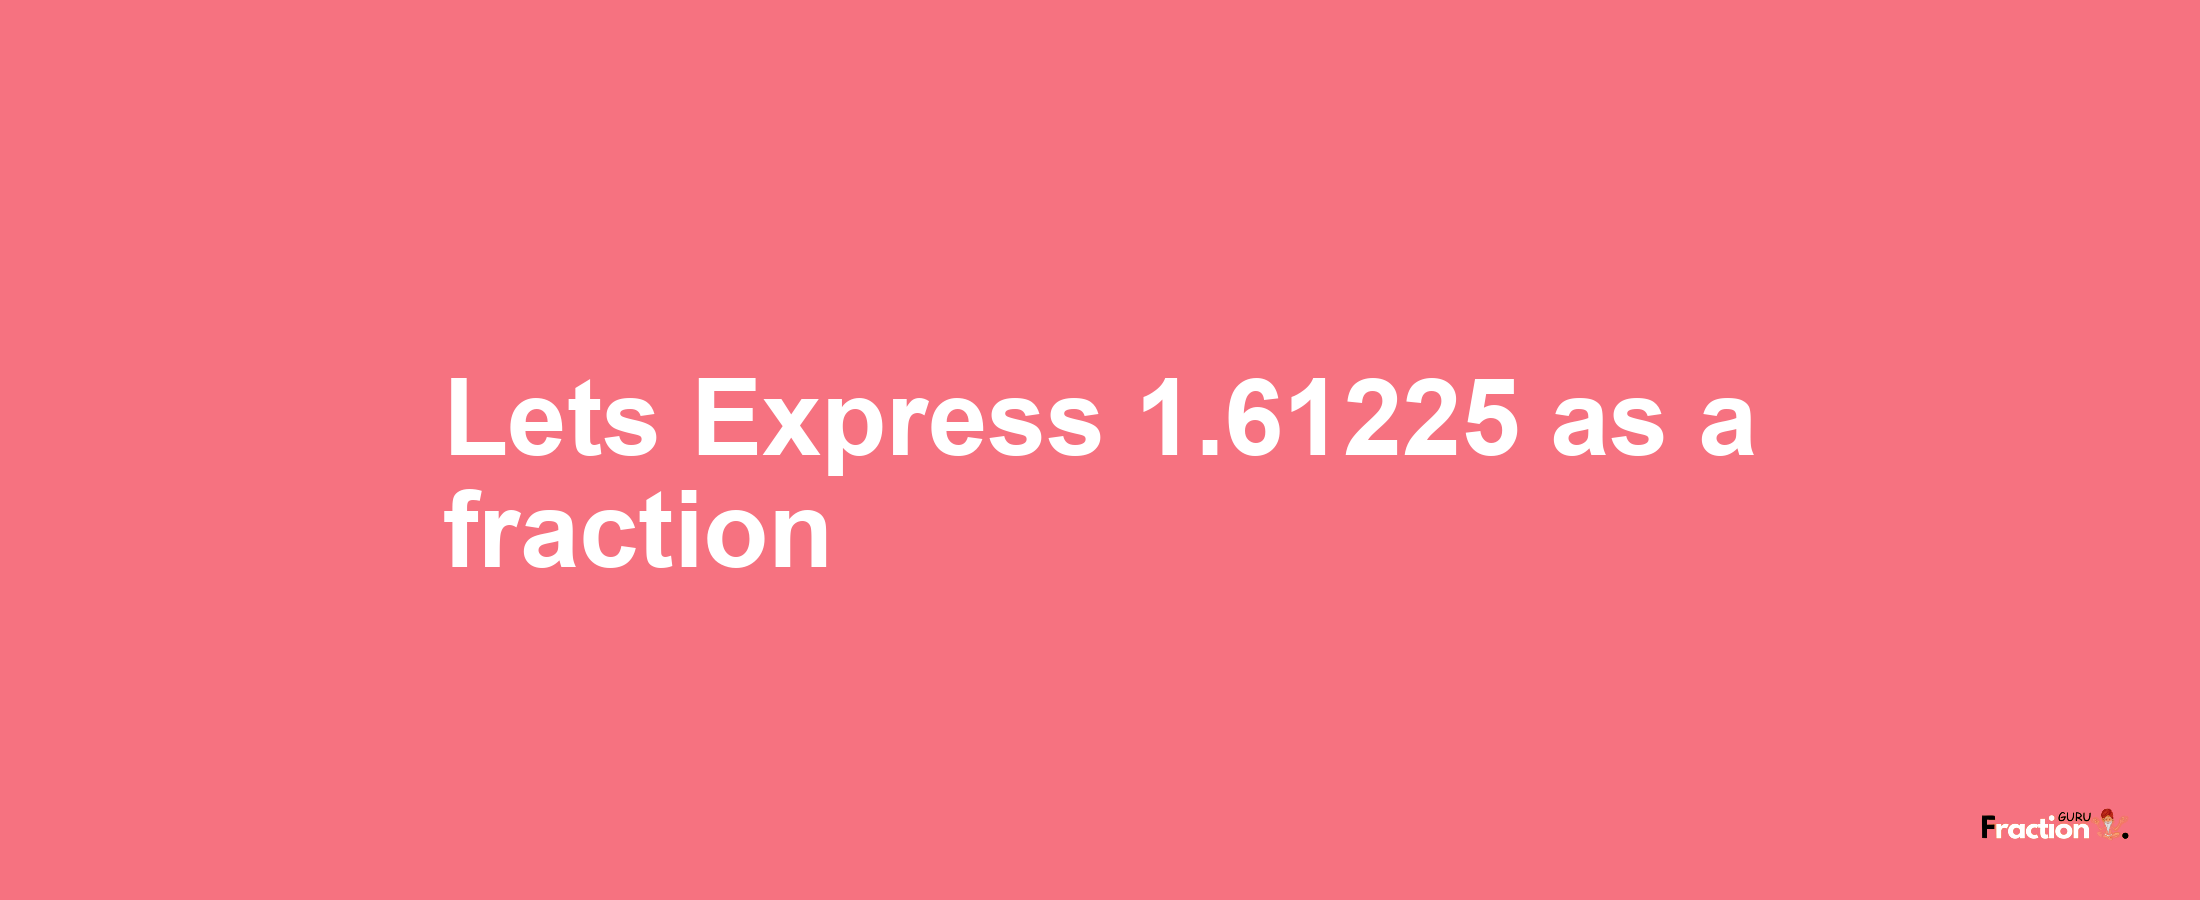 Lets Express 1.61225 as afraction